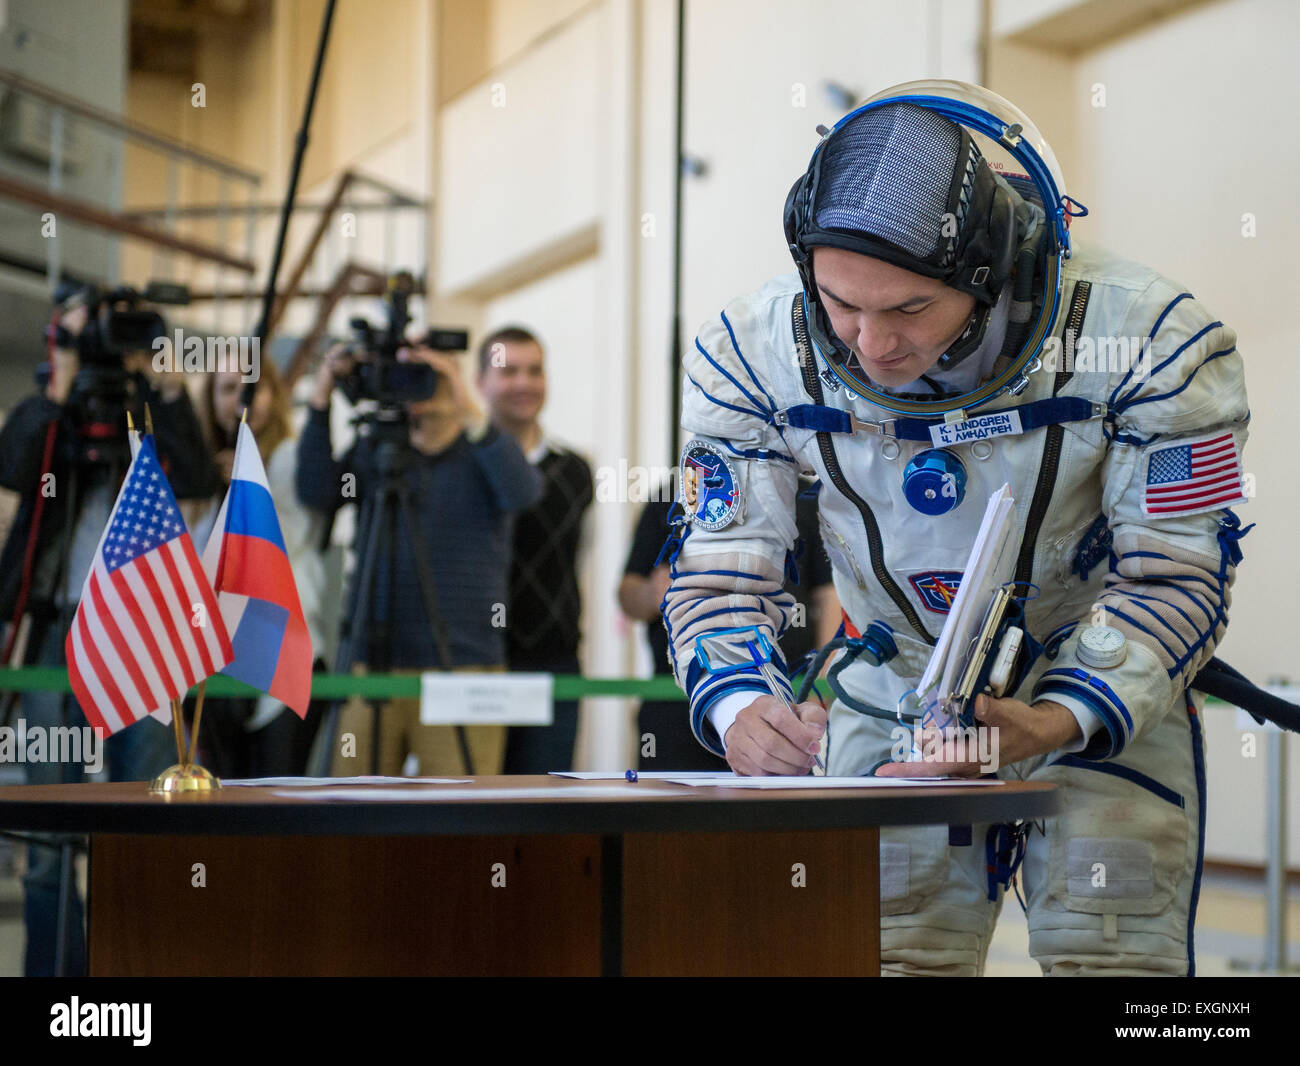 NASA astronaut Kjell Lindgren signs documents during the second day of qualification exams with Russian cosmonaut Oleg Kononenko and Japan Aerospace Exploration Agency (JAXA) astronaut Kimya Yui, Thursday, May 7, 2015 at the Gagarin Cosmonaut Training Center (GCTC) in Star City, Russia. The Expedition 44/45 trio is preparing for launch to the International Space Station in their Soyuz TMA-17M spacecraft from the Baikonur Cosmodrome in Kazakhstan. Stock Photo